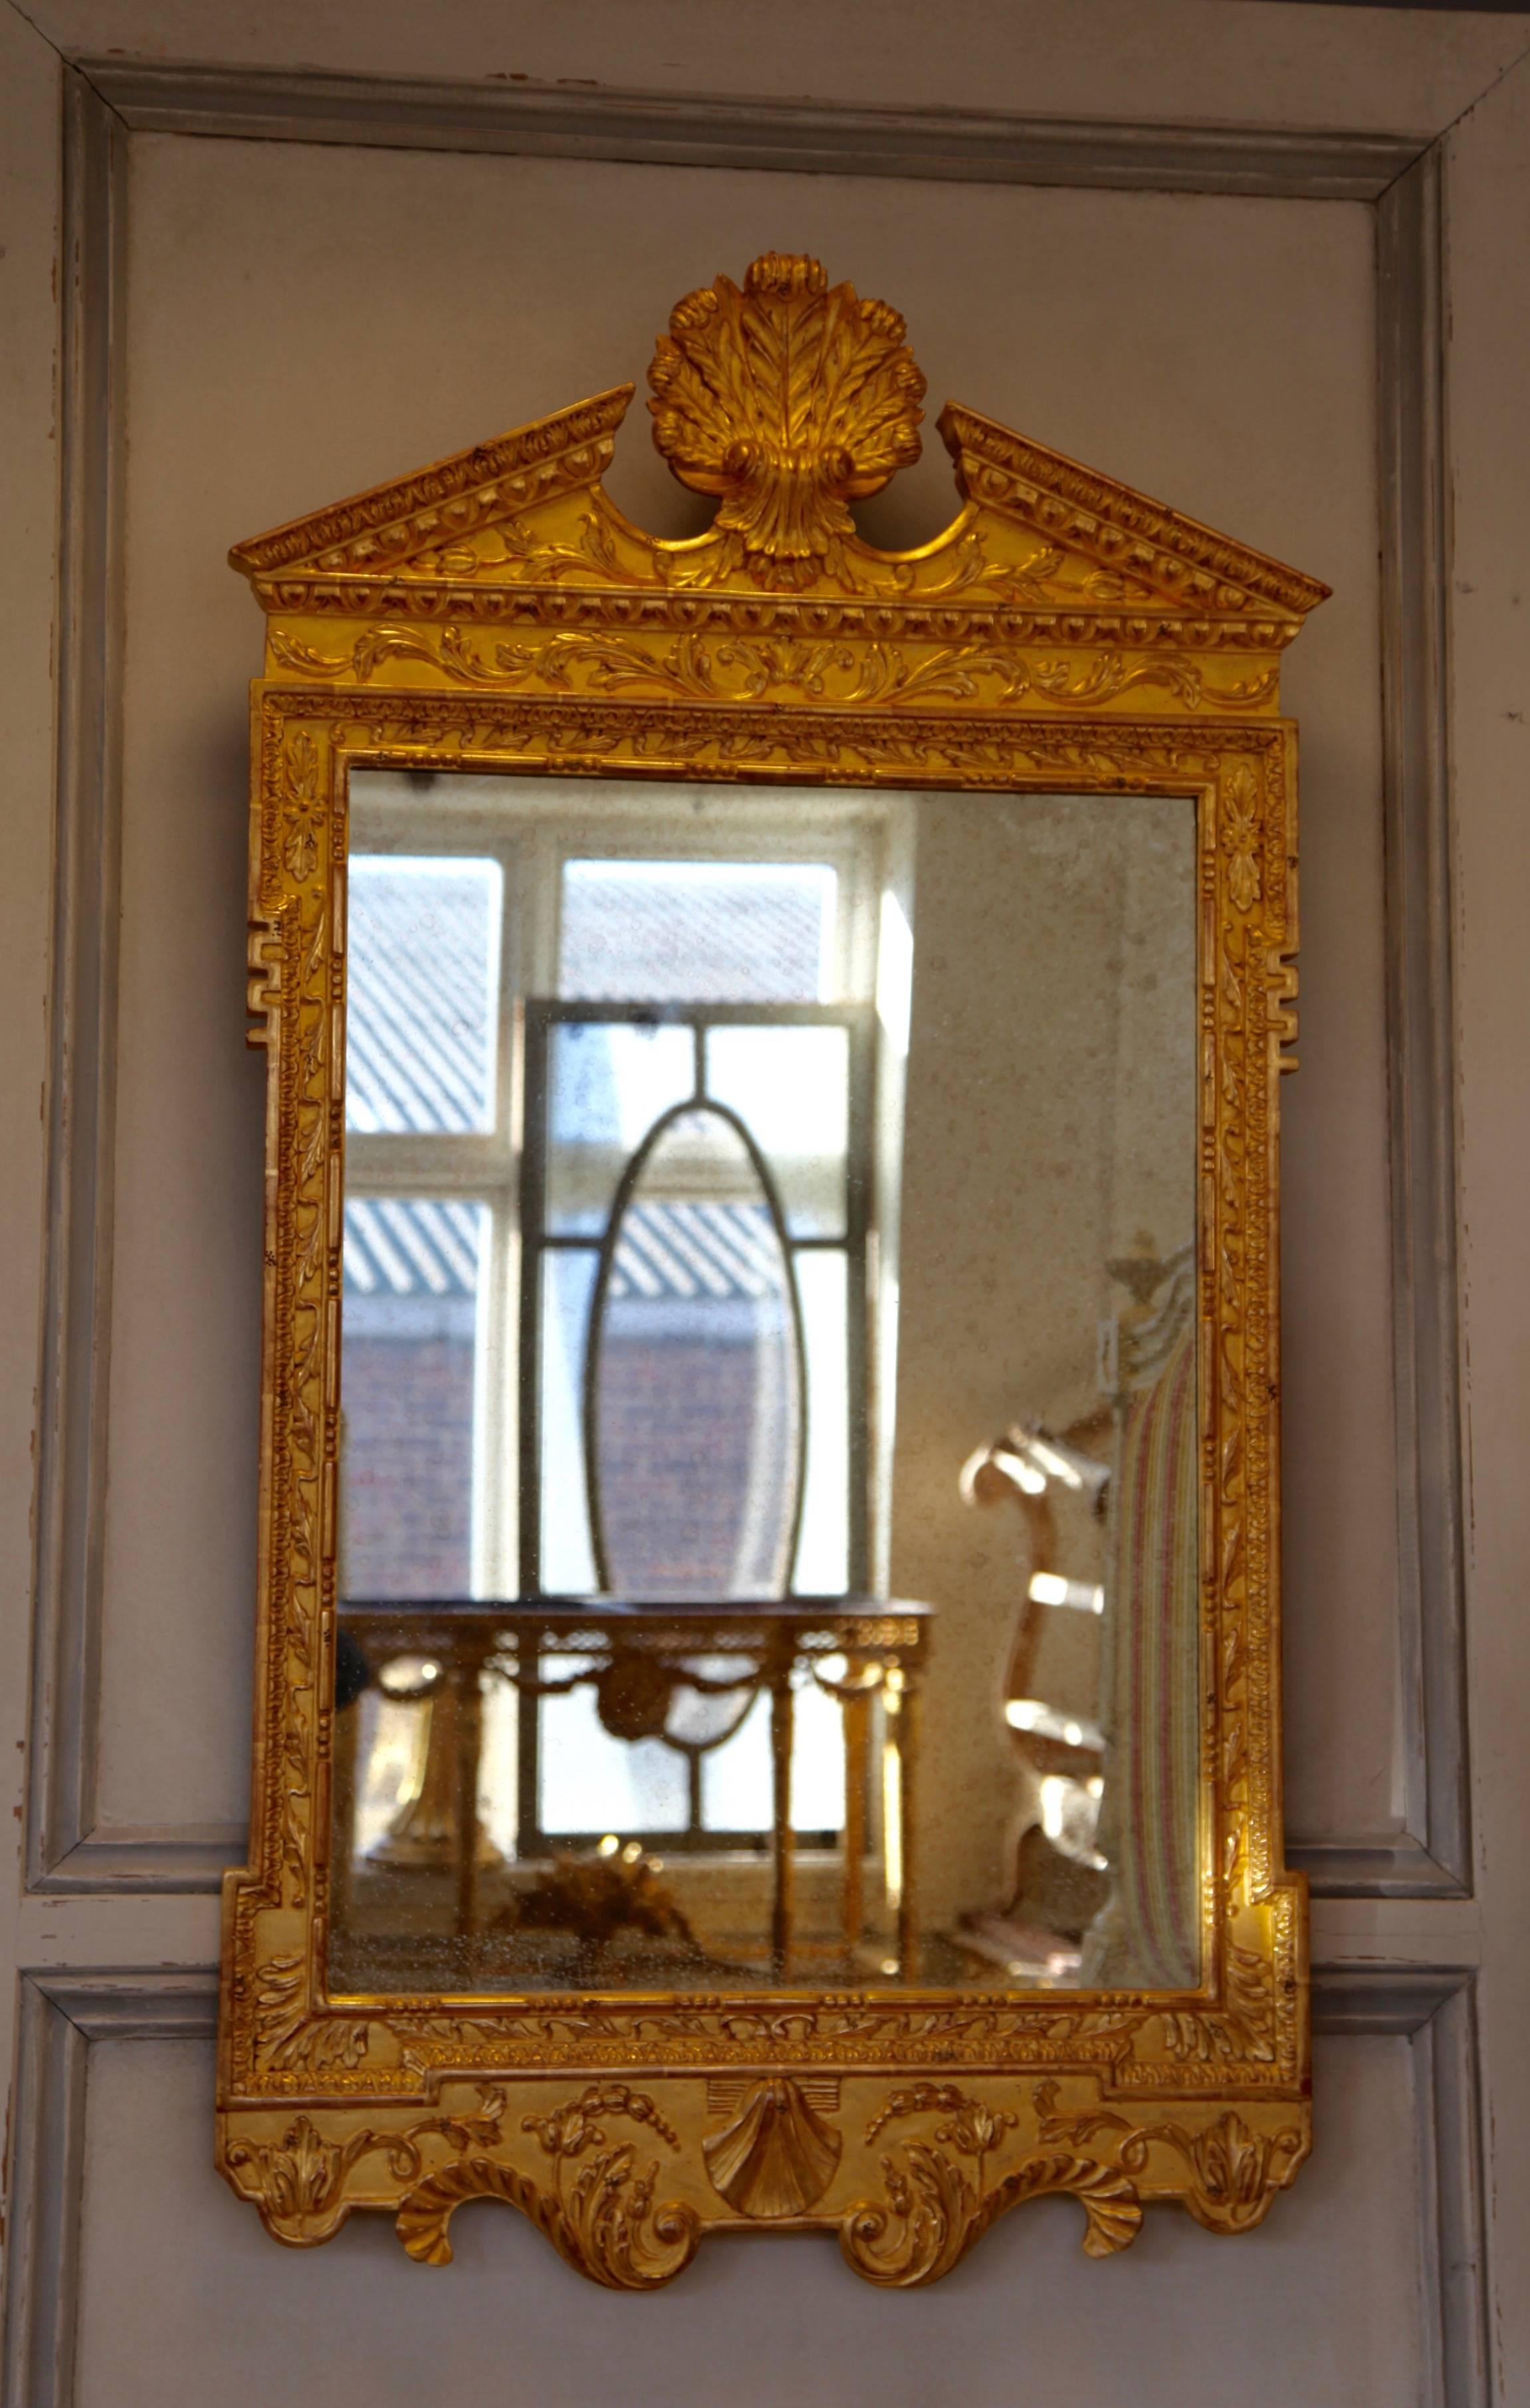 Georgian style, hand-carved mirror finished in traditionally applied gold leaf with light, antique patina.